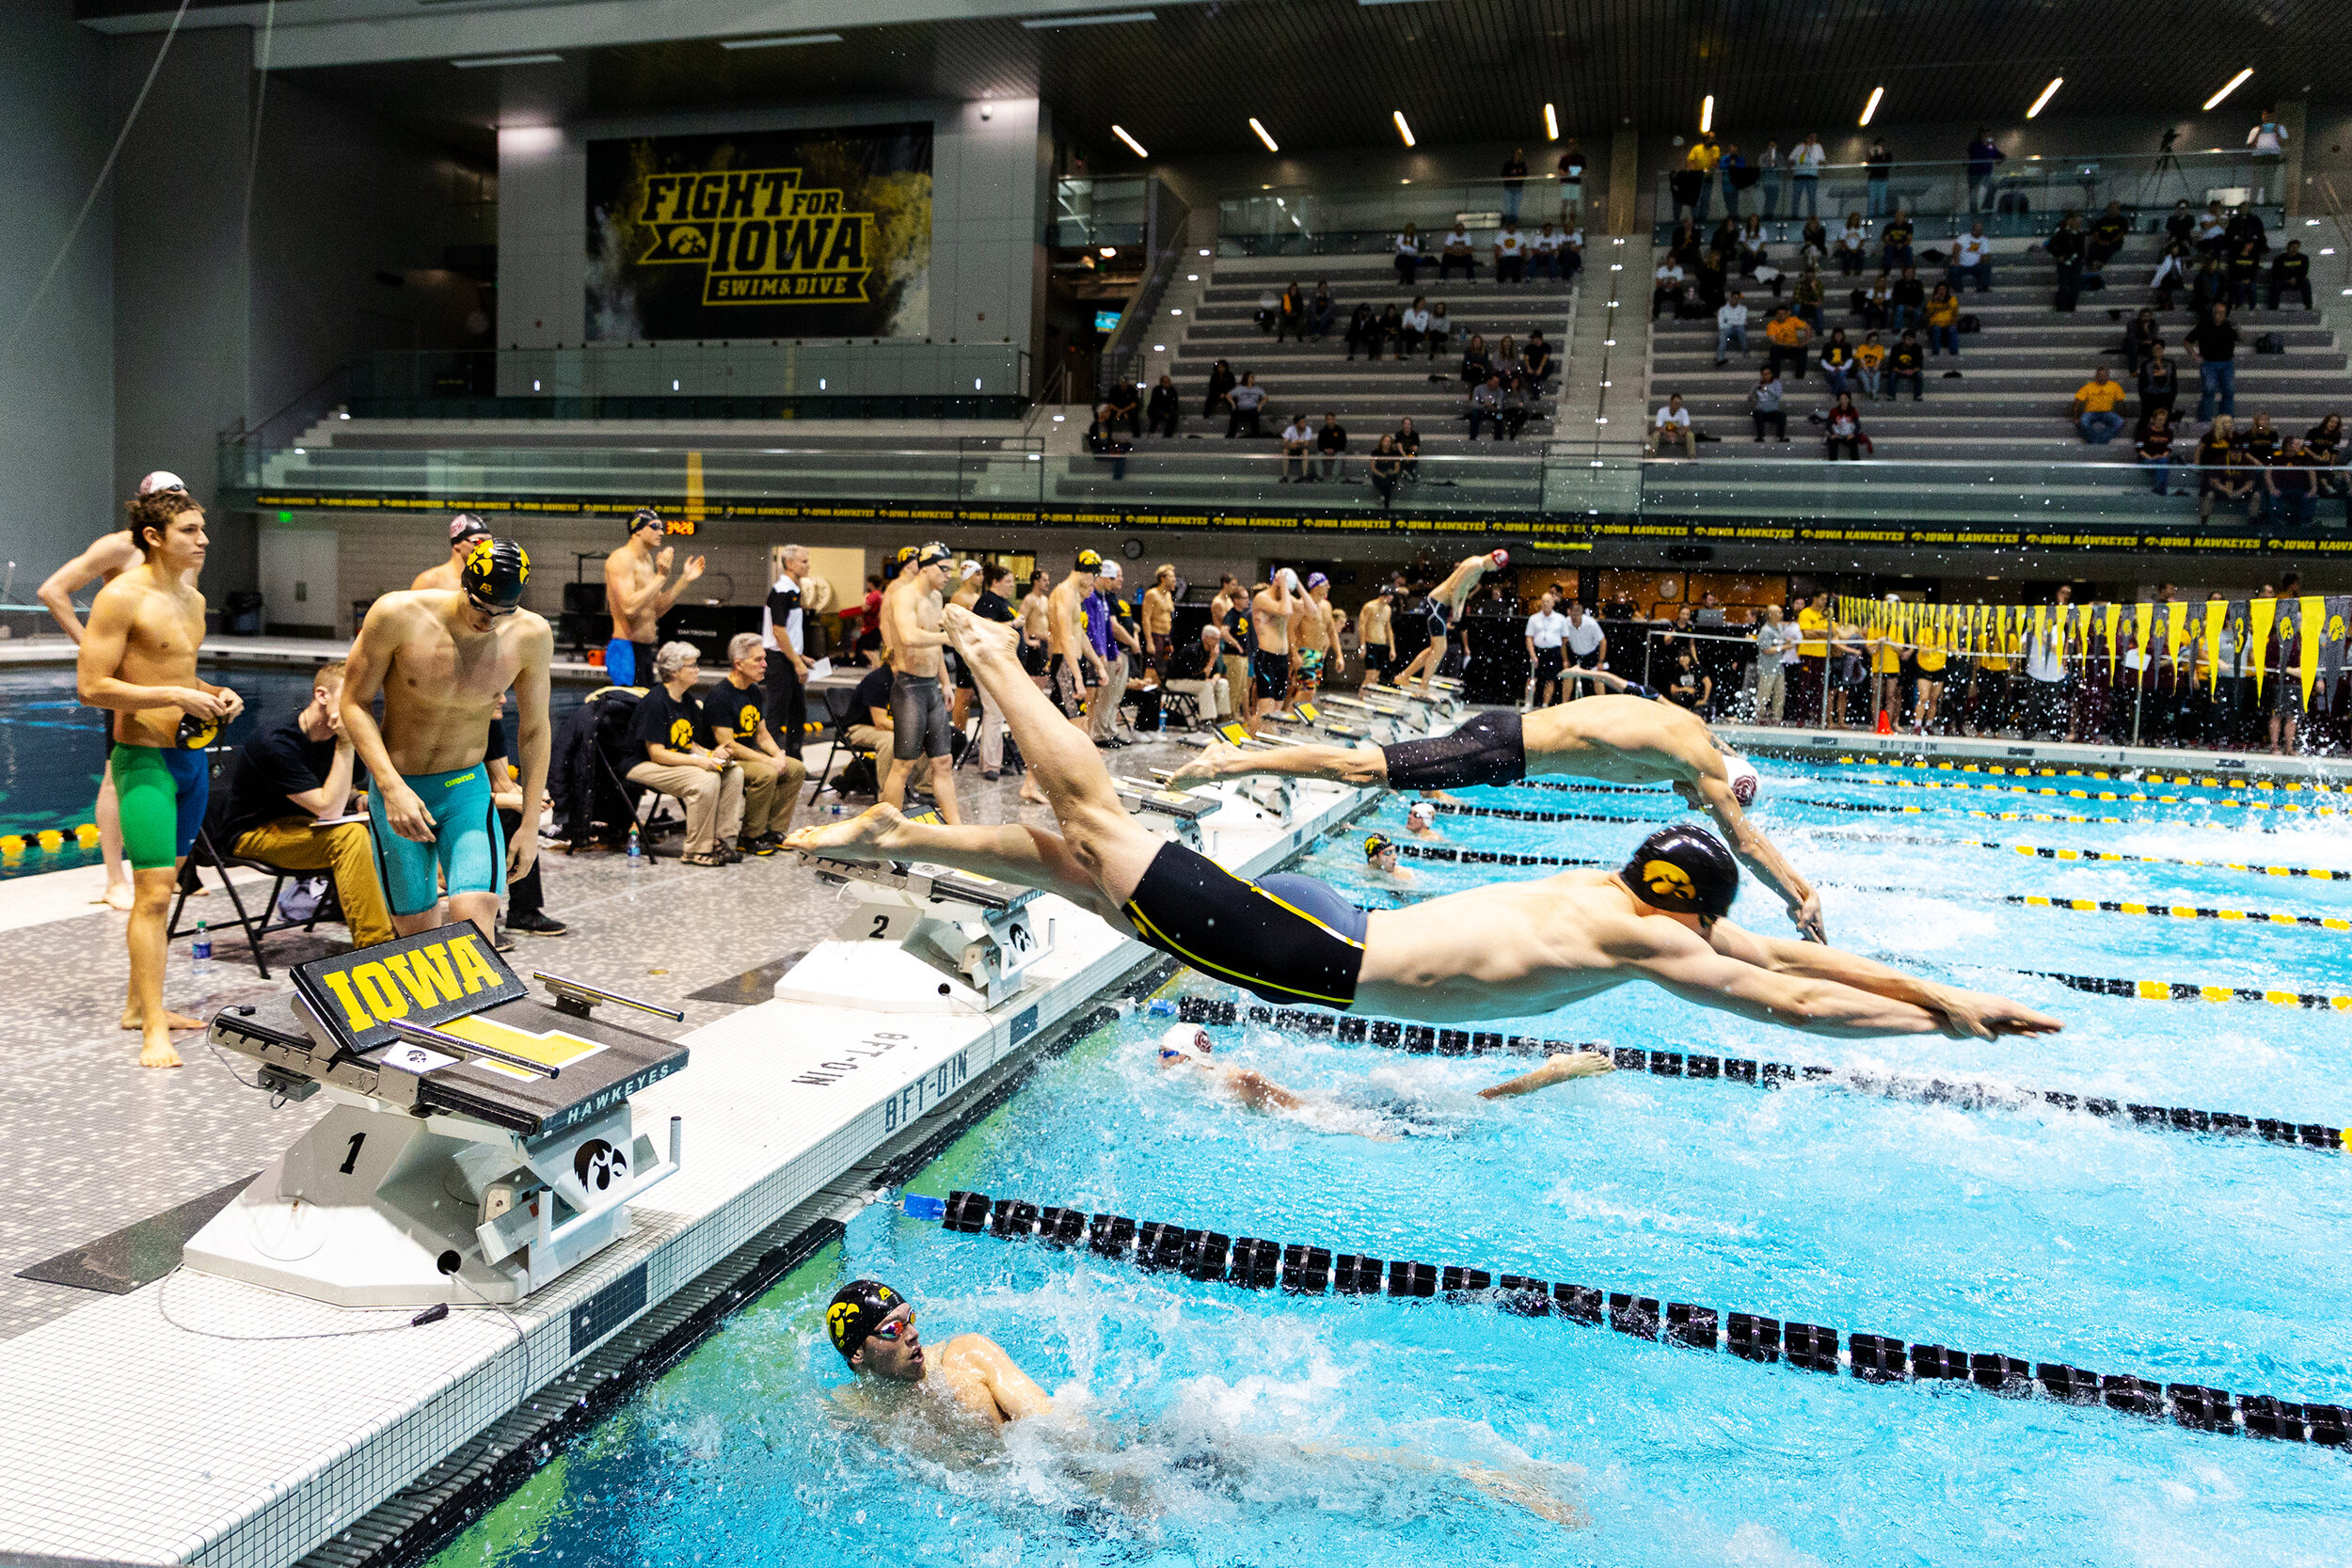  Swimmers leap over teammates during the men's 400m freestyle relay at the Hawkeye Invitational on Saturday, Nov. 17, 2018.  